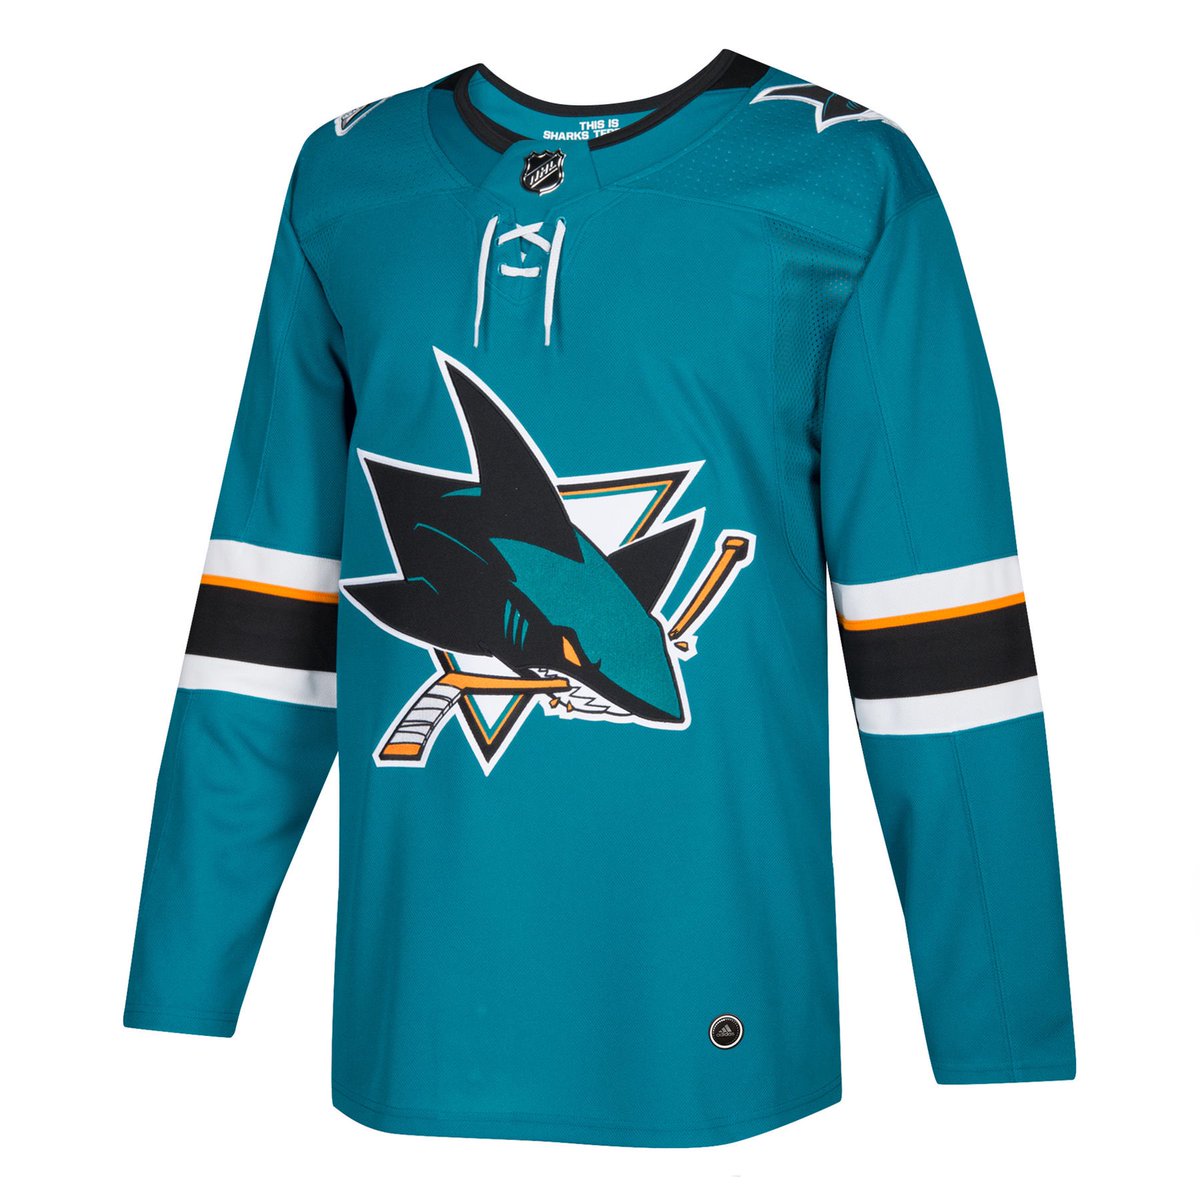 1. Just add the same stripes on the sleeves at the bottom of the jersey because it looks a bit empty. That would be such a great jersey.